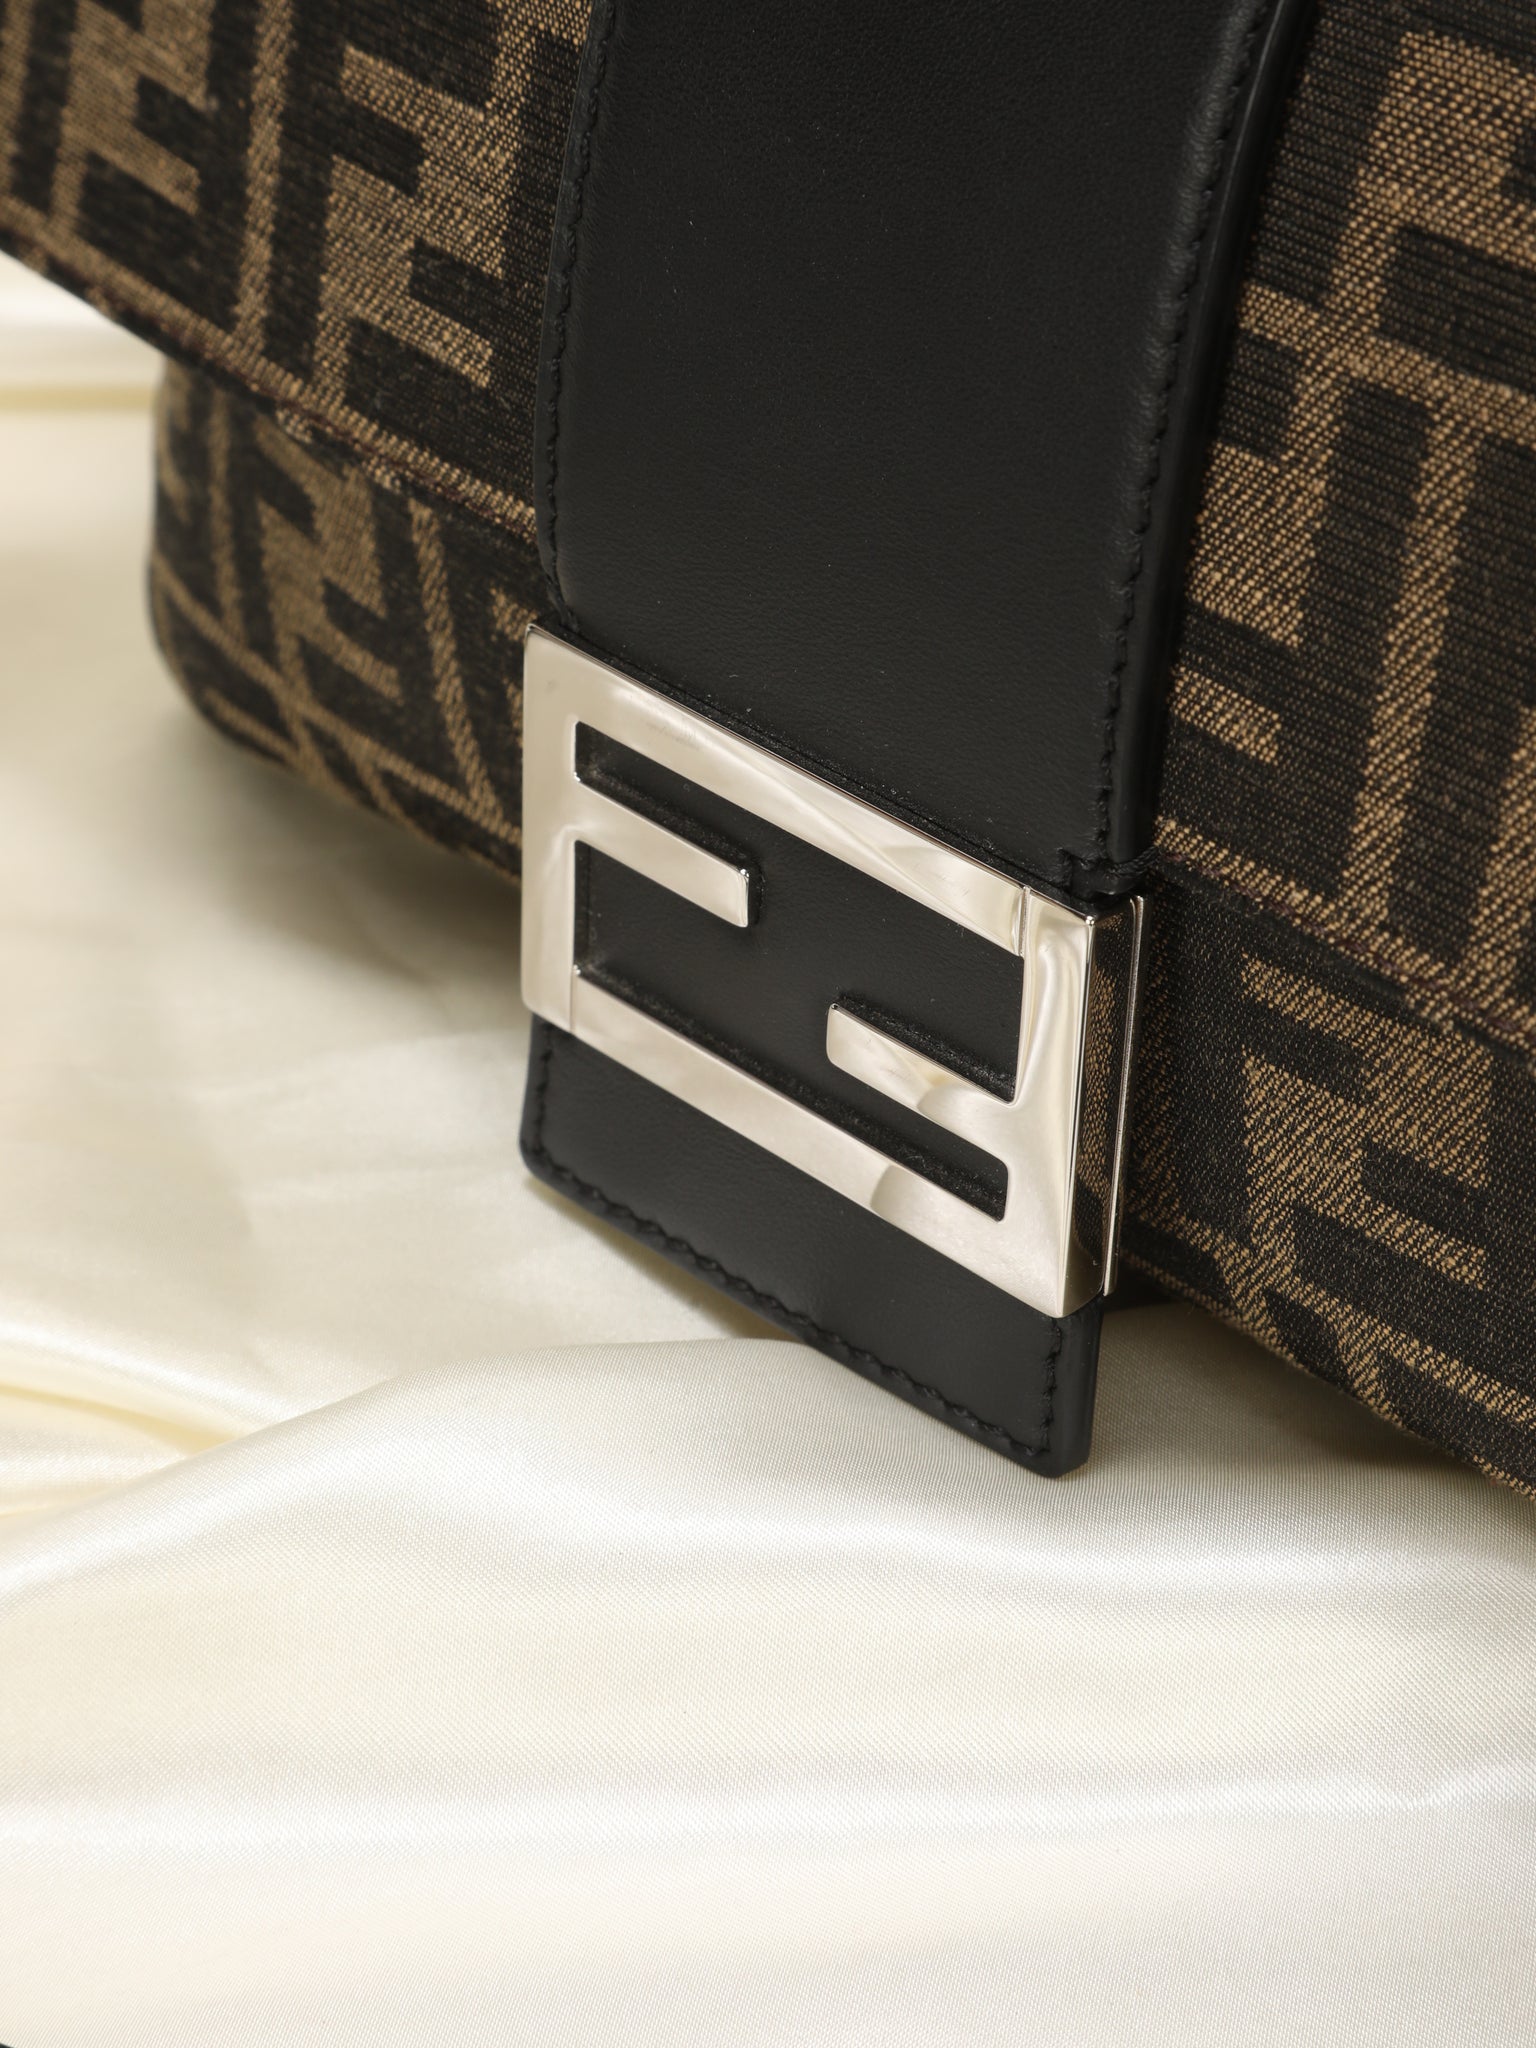 Extremely Rare Fendi Zucca Convertible Bag